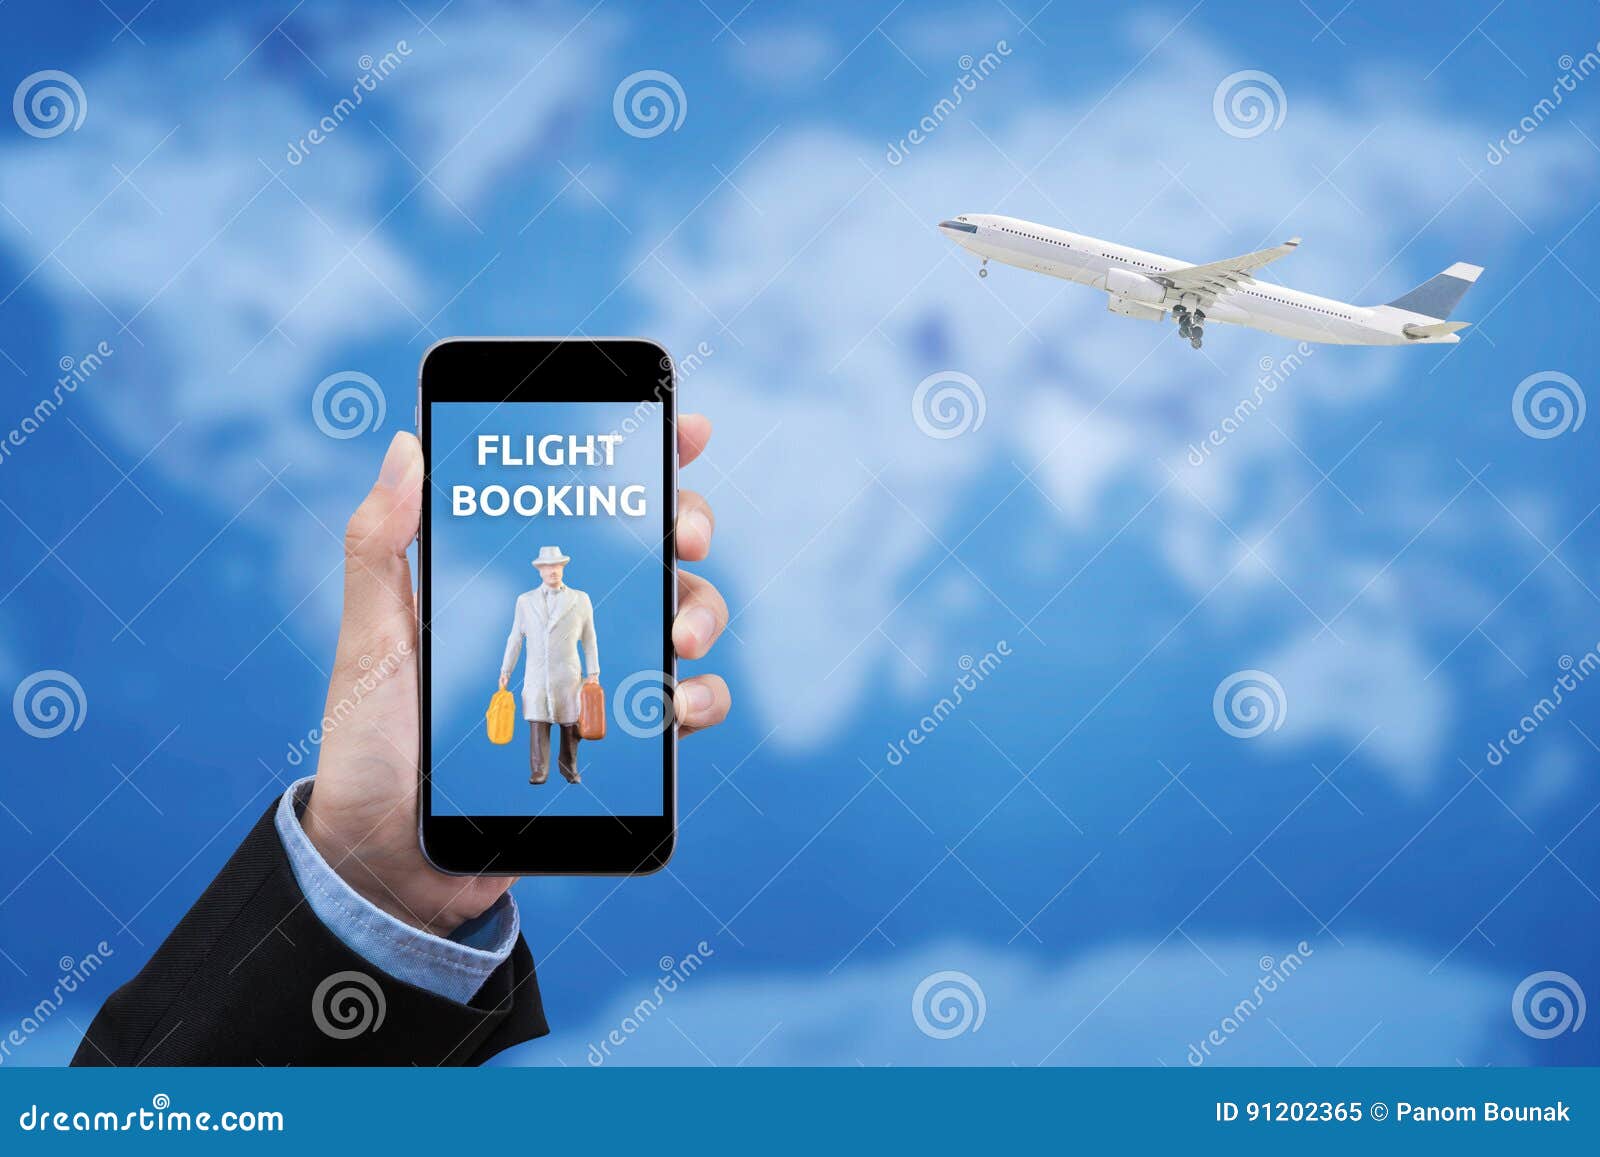 book flight from HOB to MSO by phone